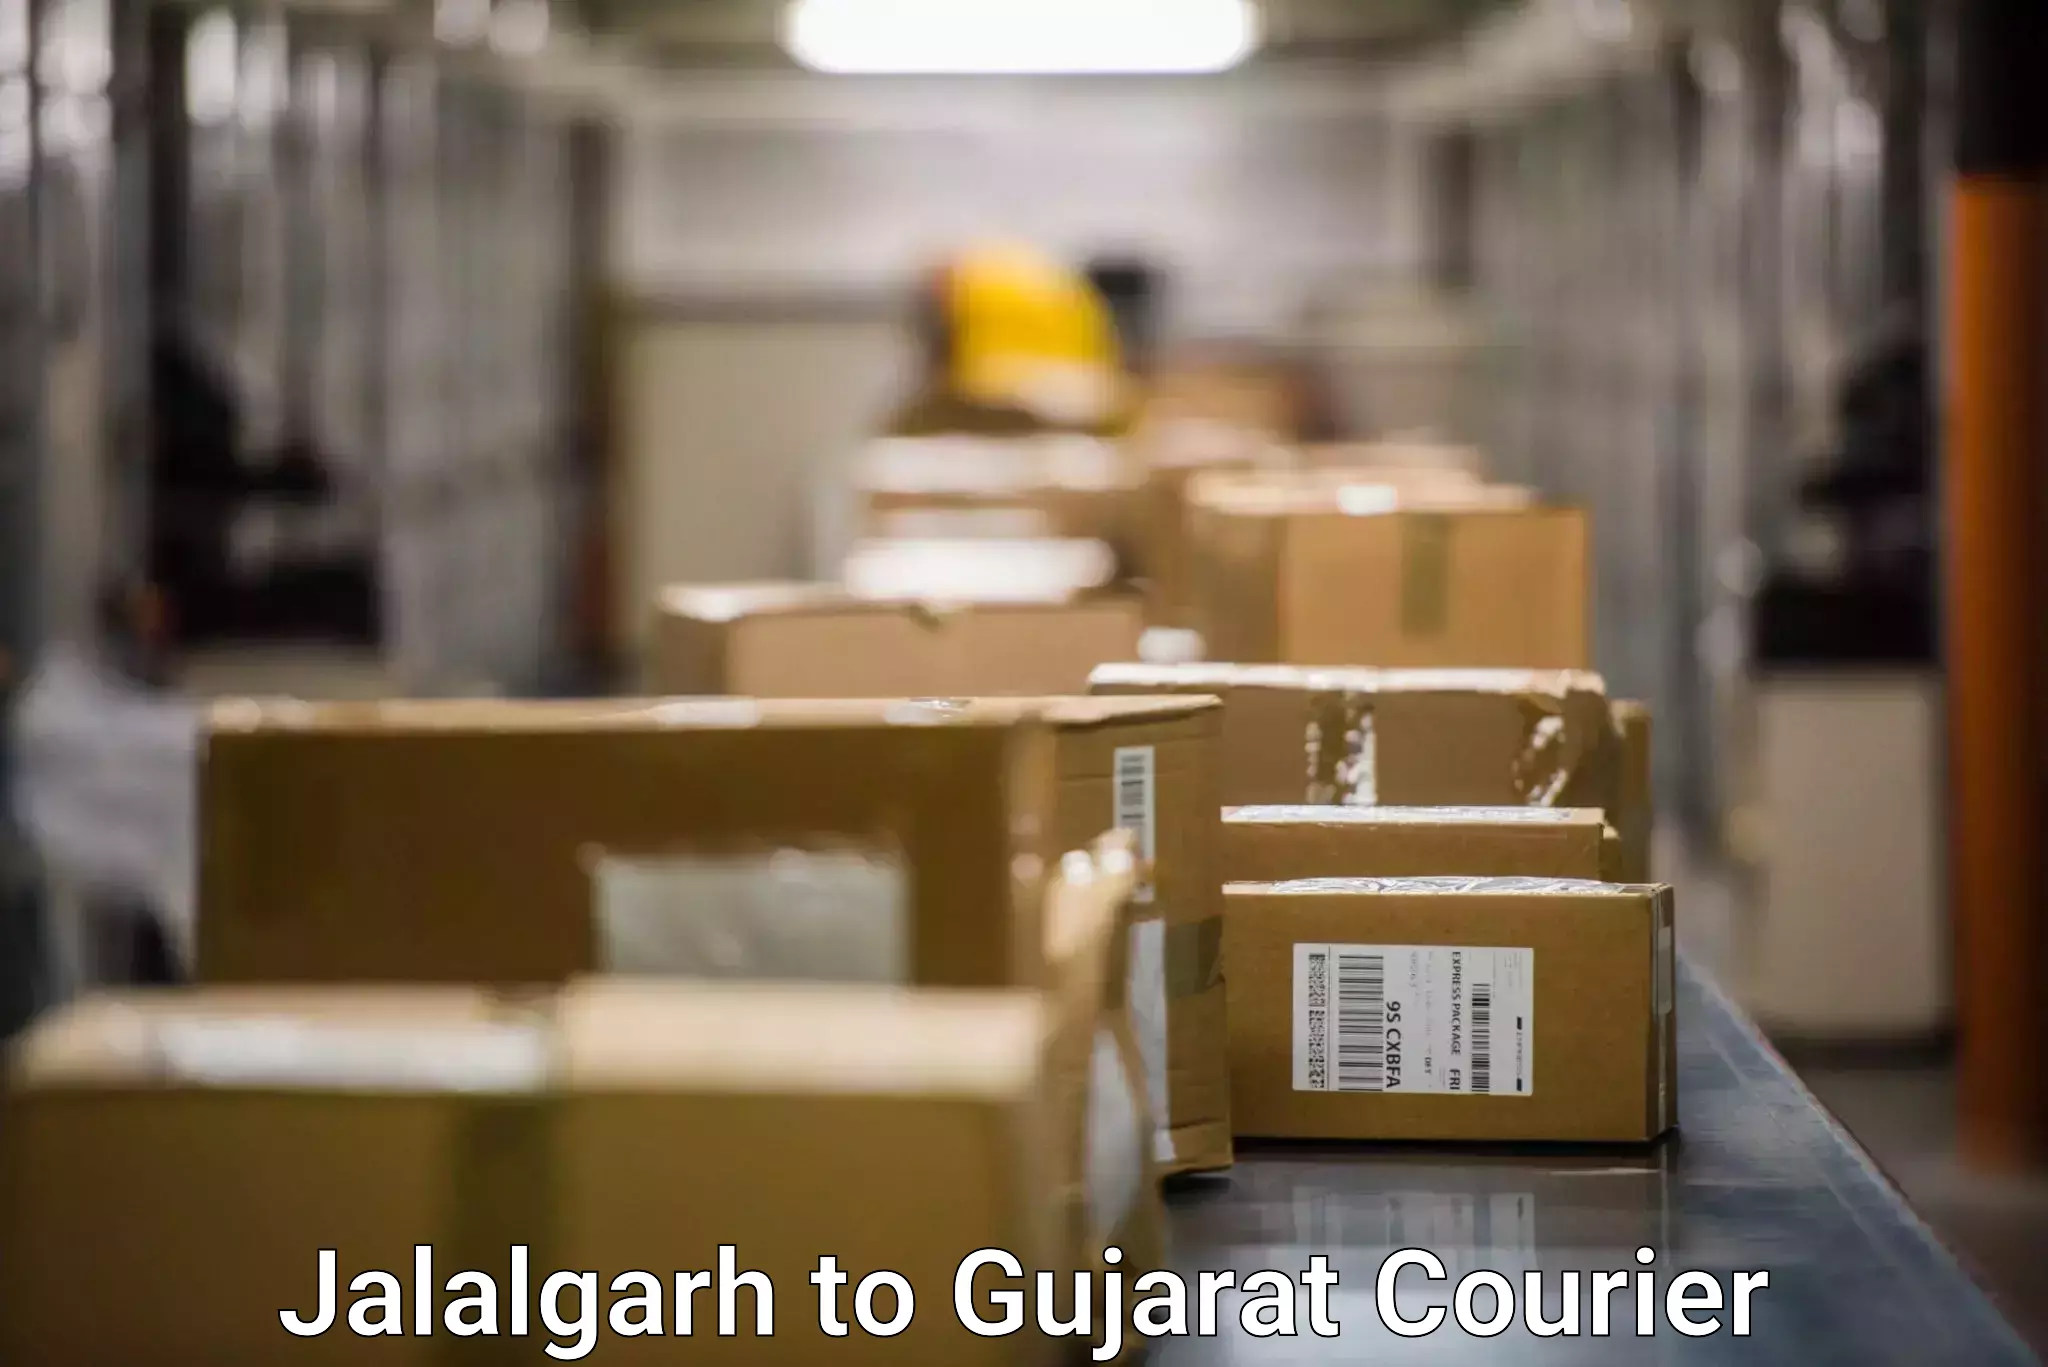 Reliable courier service Jalalgarh to Keshod